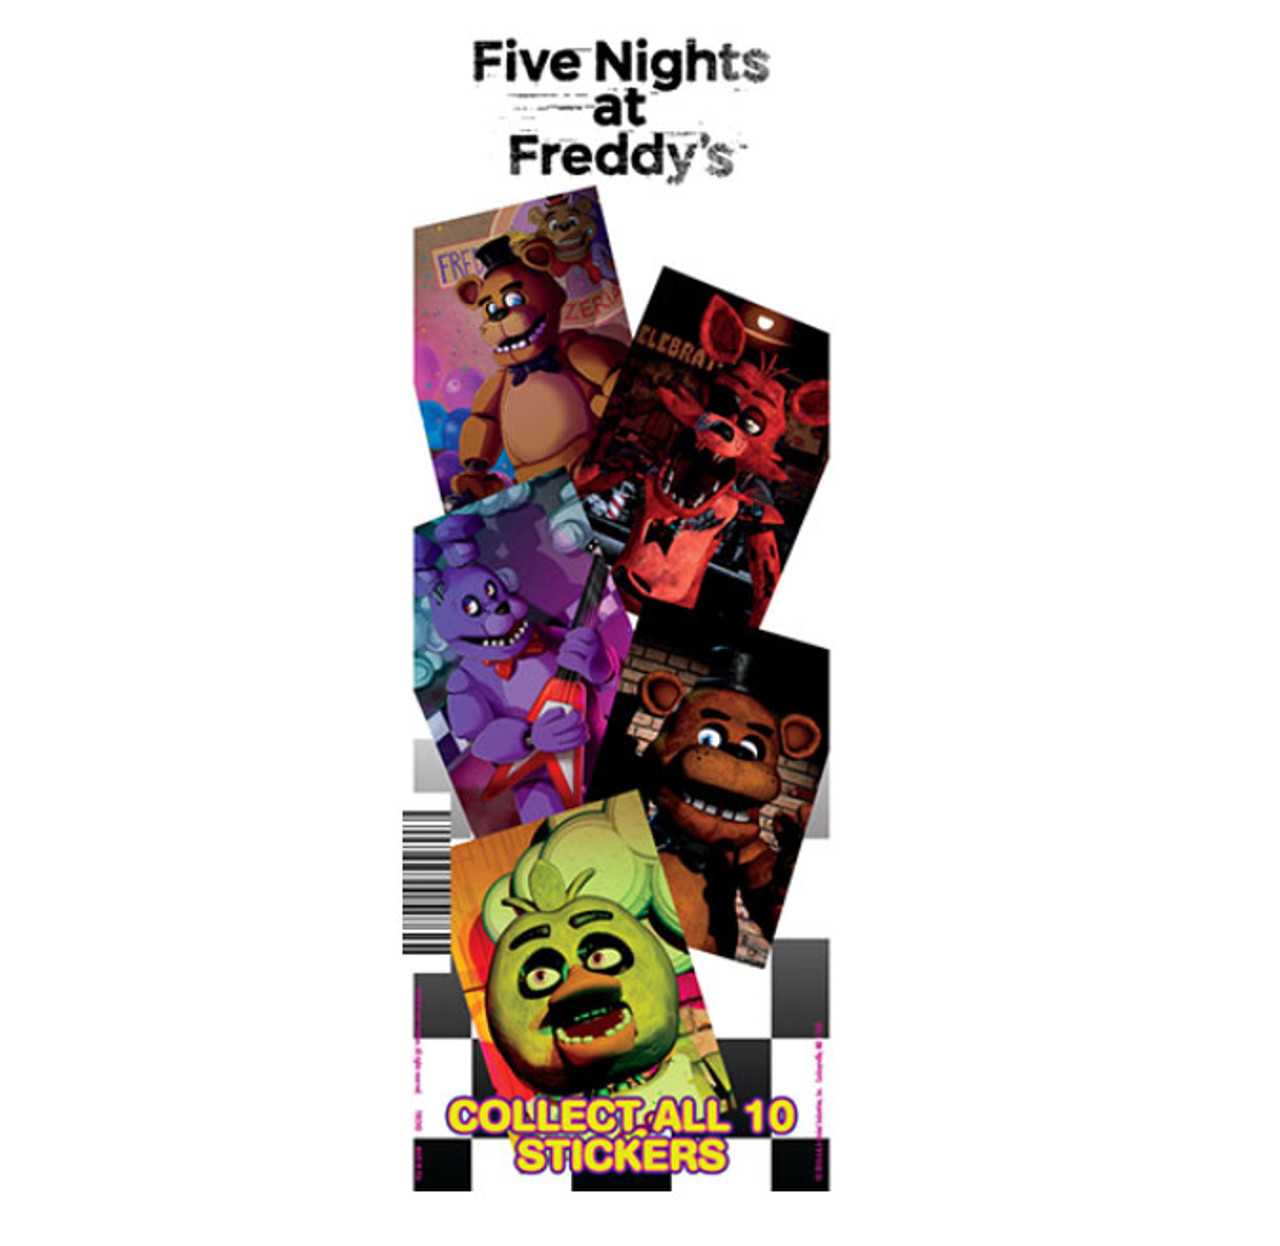 Five Nights at Freddy's Stickers (300 ct)